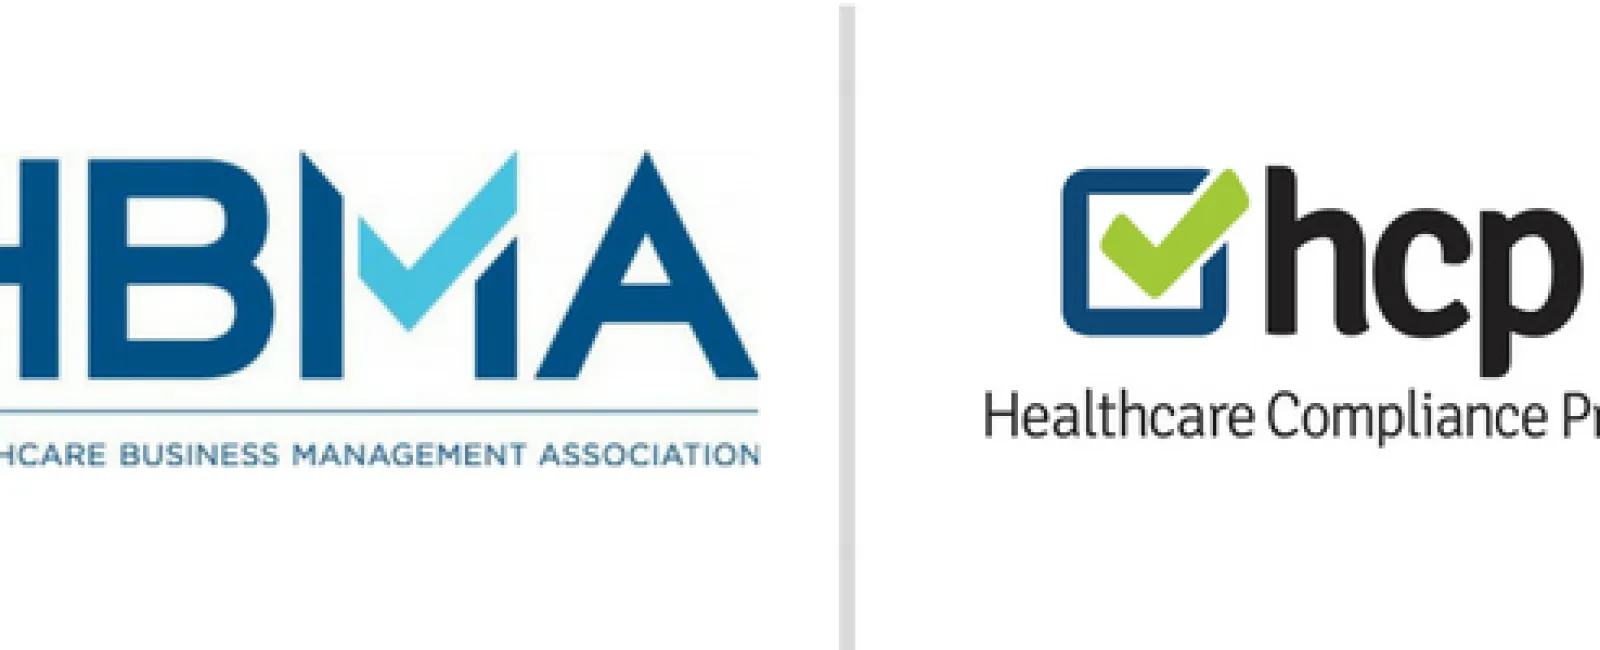 Healthcare Compliance Pros Announces Partnership with HBMA